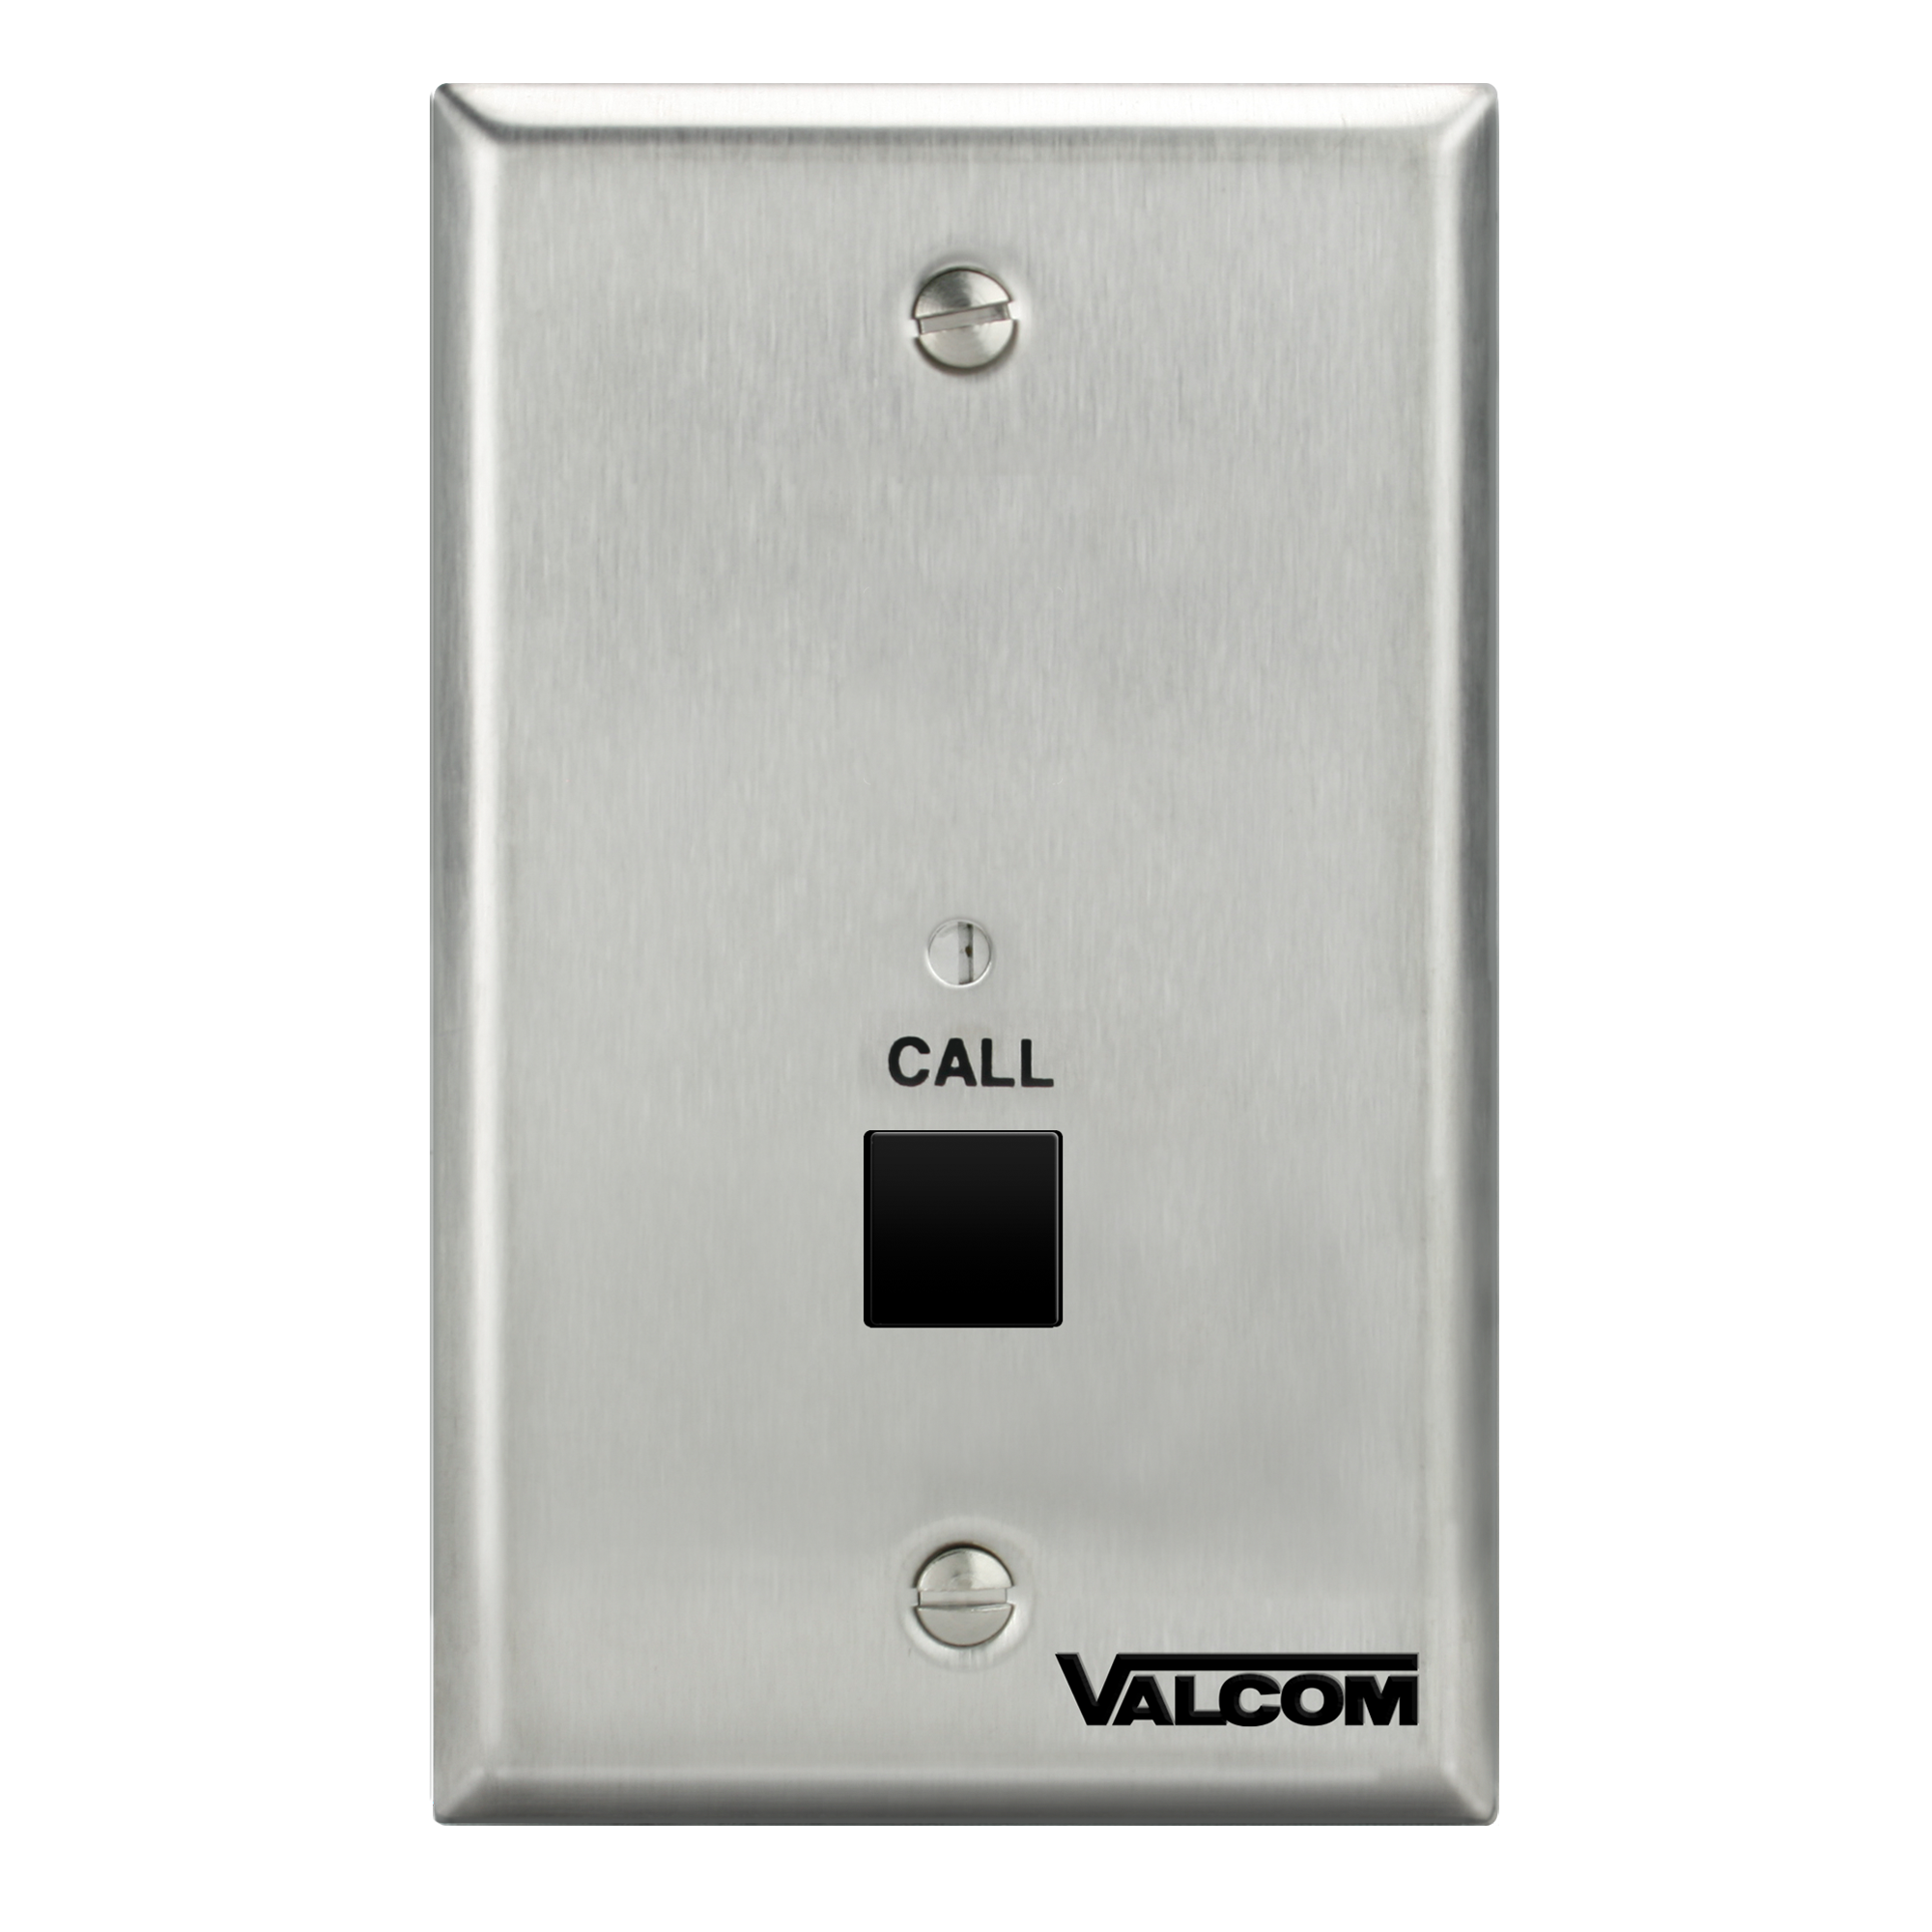 V-2977 Call Button with Volume Control, Stainless Steel